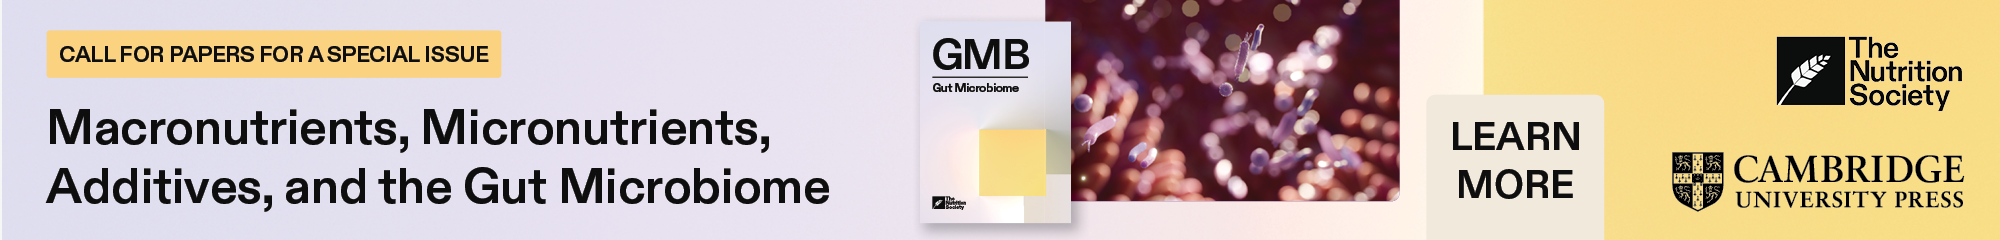 Click to explore the Call for Papers for a Special Issue on Macronutrients, Micronutrients, Additives, and the Gut Microbiome